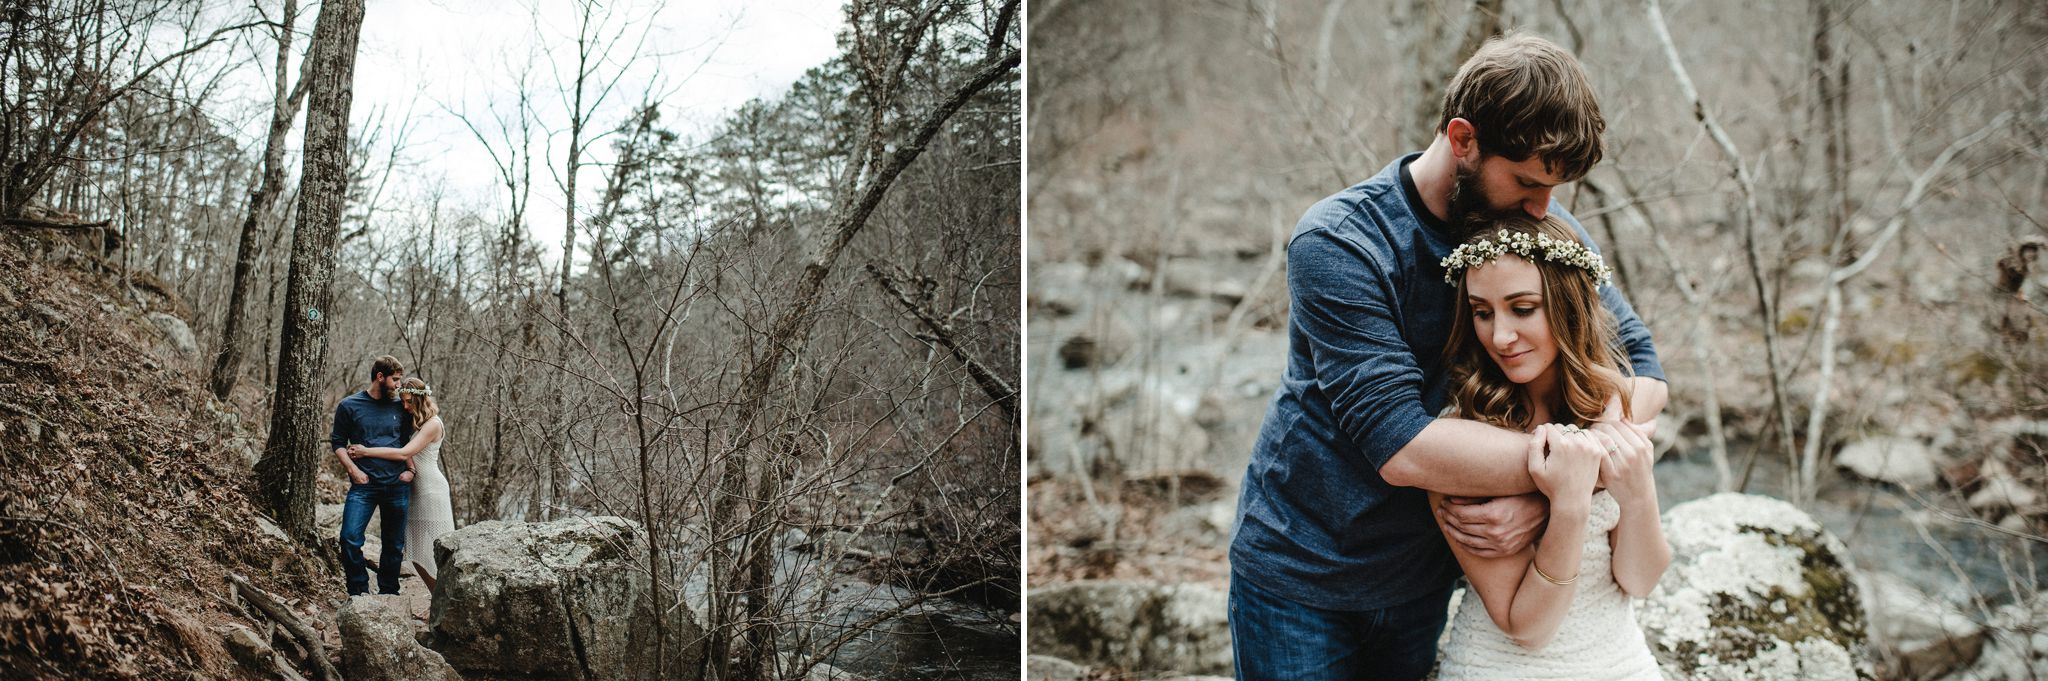 Hawn State Park Engagement Session